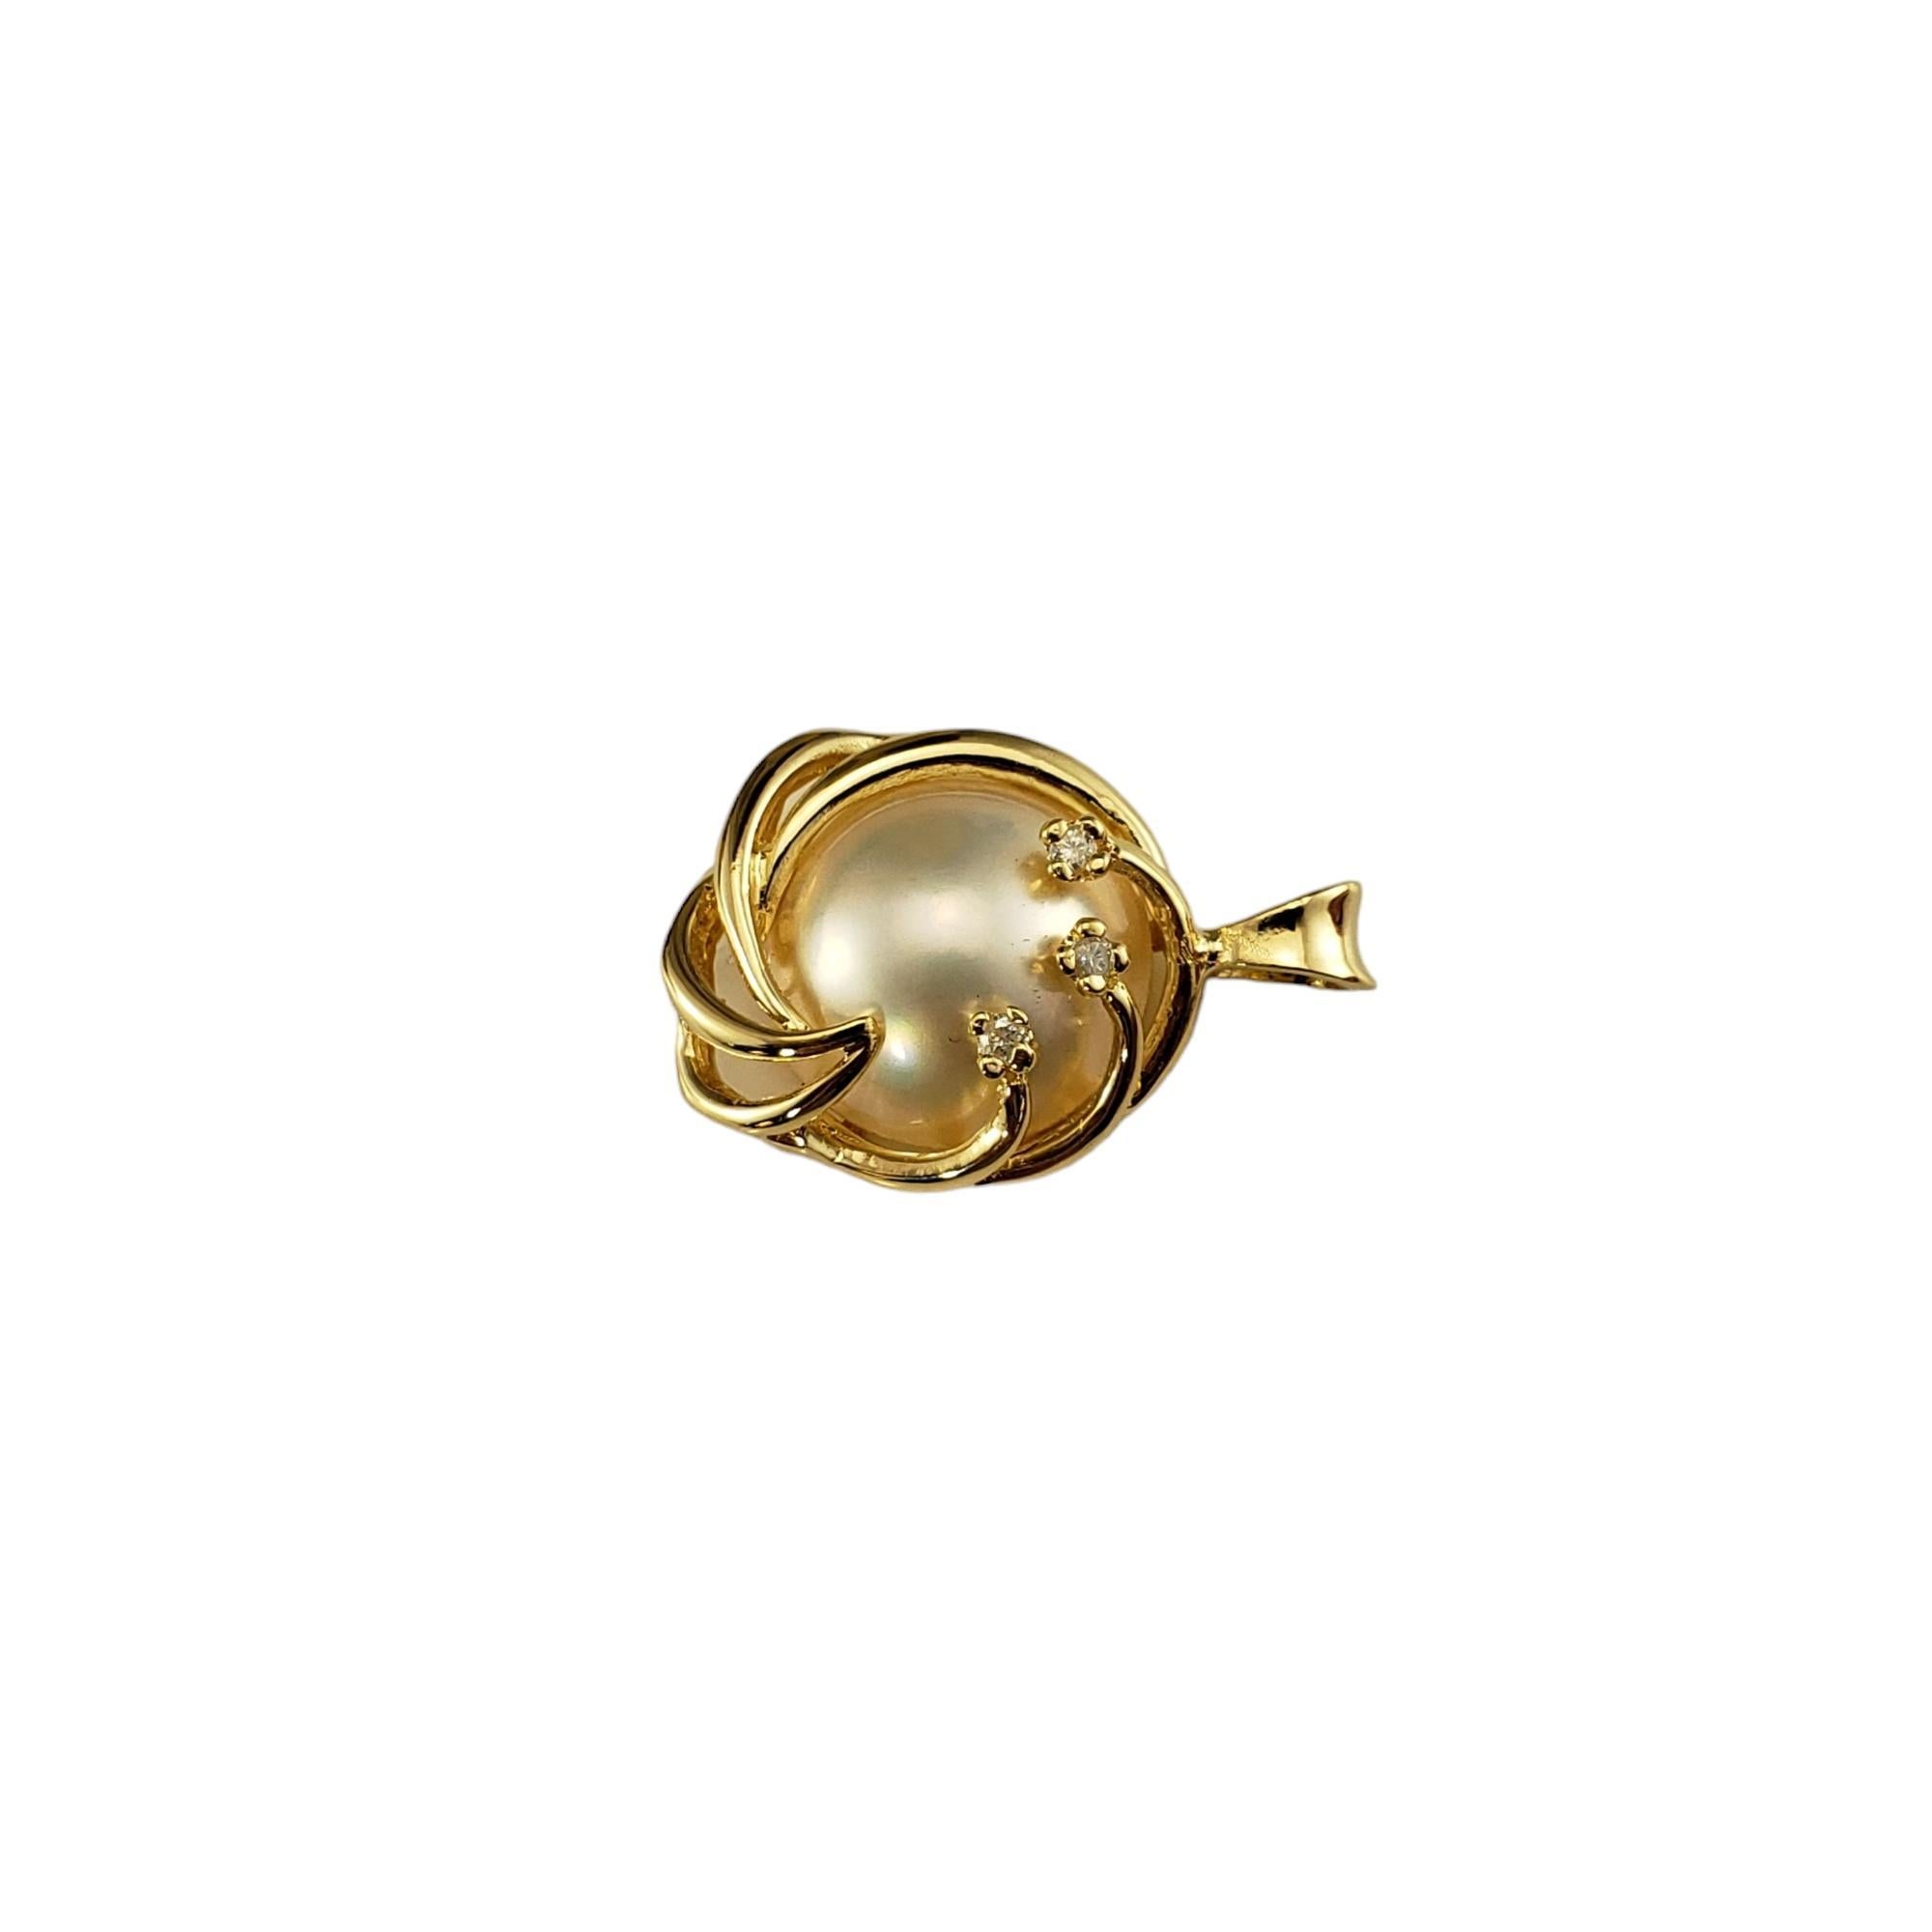 Vintage 14 Karat Yellow Gold Mabe Pearl and Diamond Pearl Pendant-

This elegant pendant features one Mabe pearl and three round single cut diamonds set in beautifully detailed 14K yellow gold.

*Matching ring: #16725
*Matching earrings: